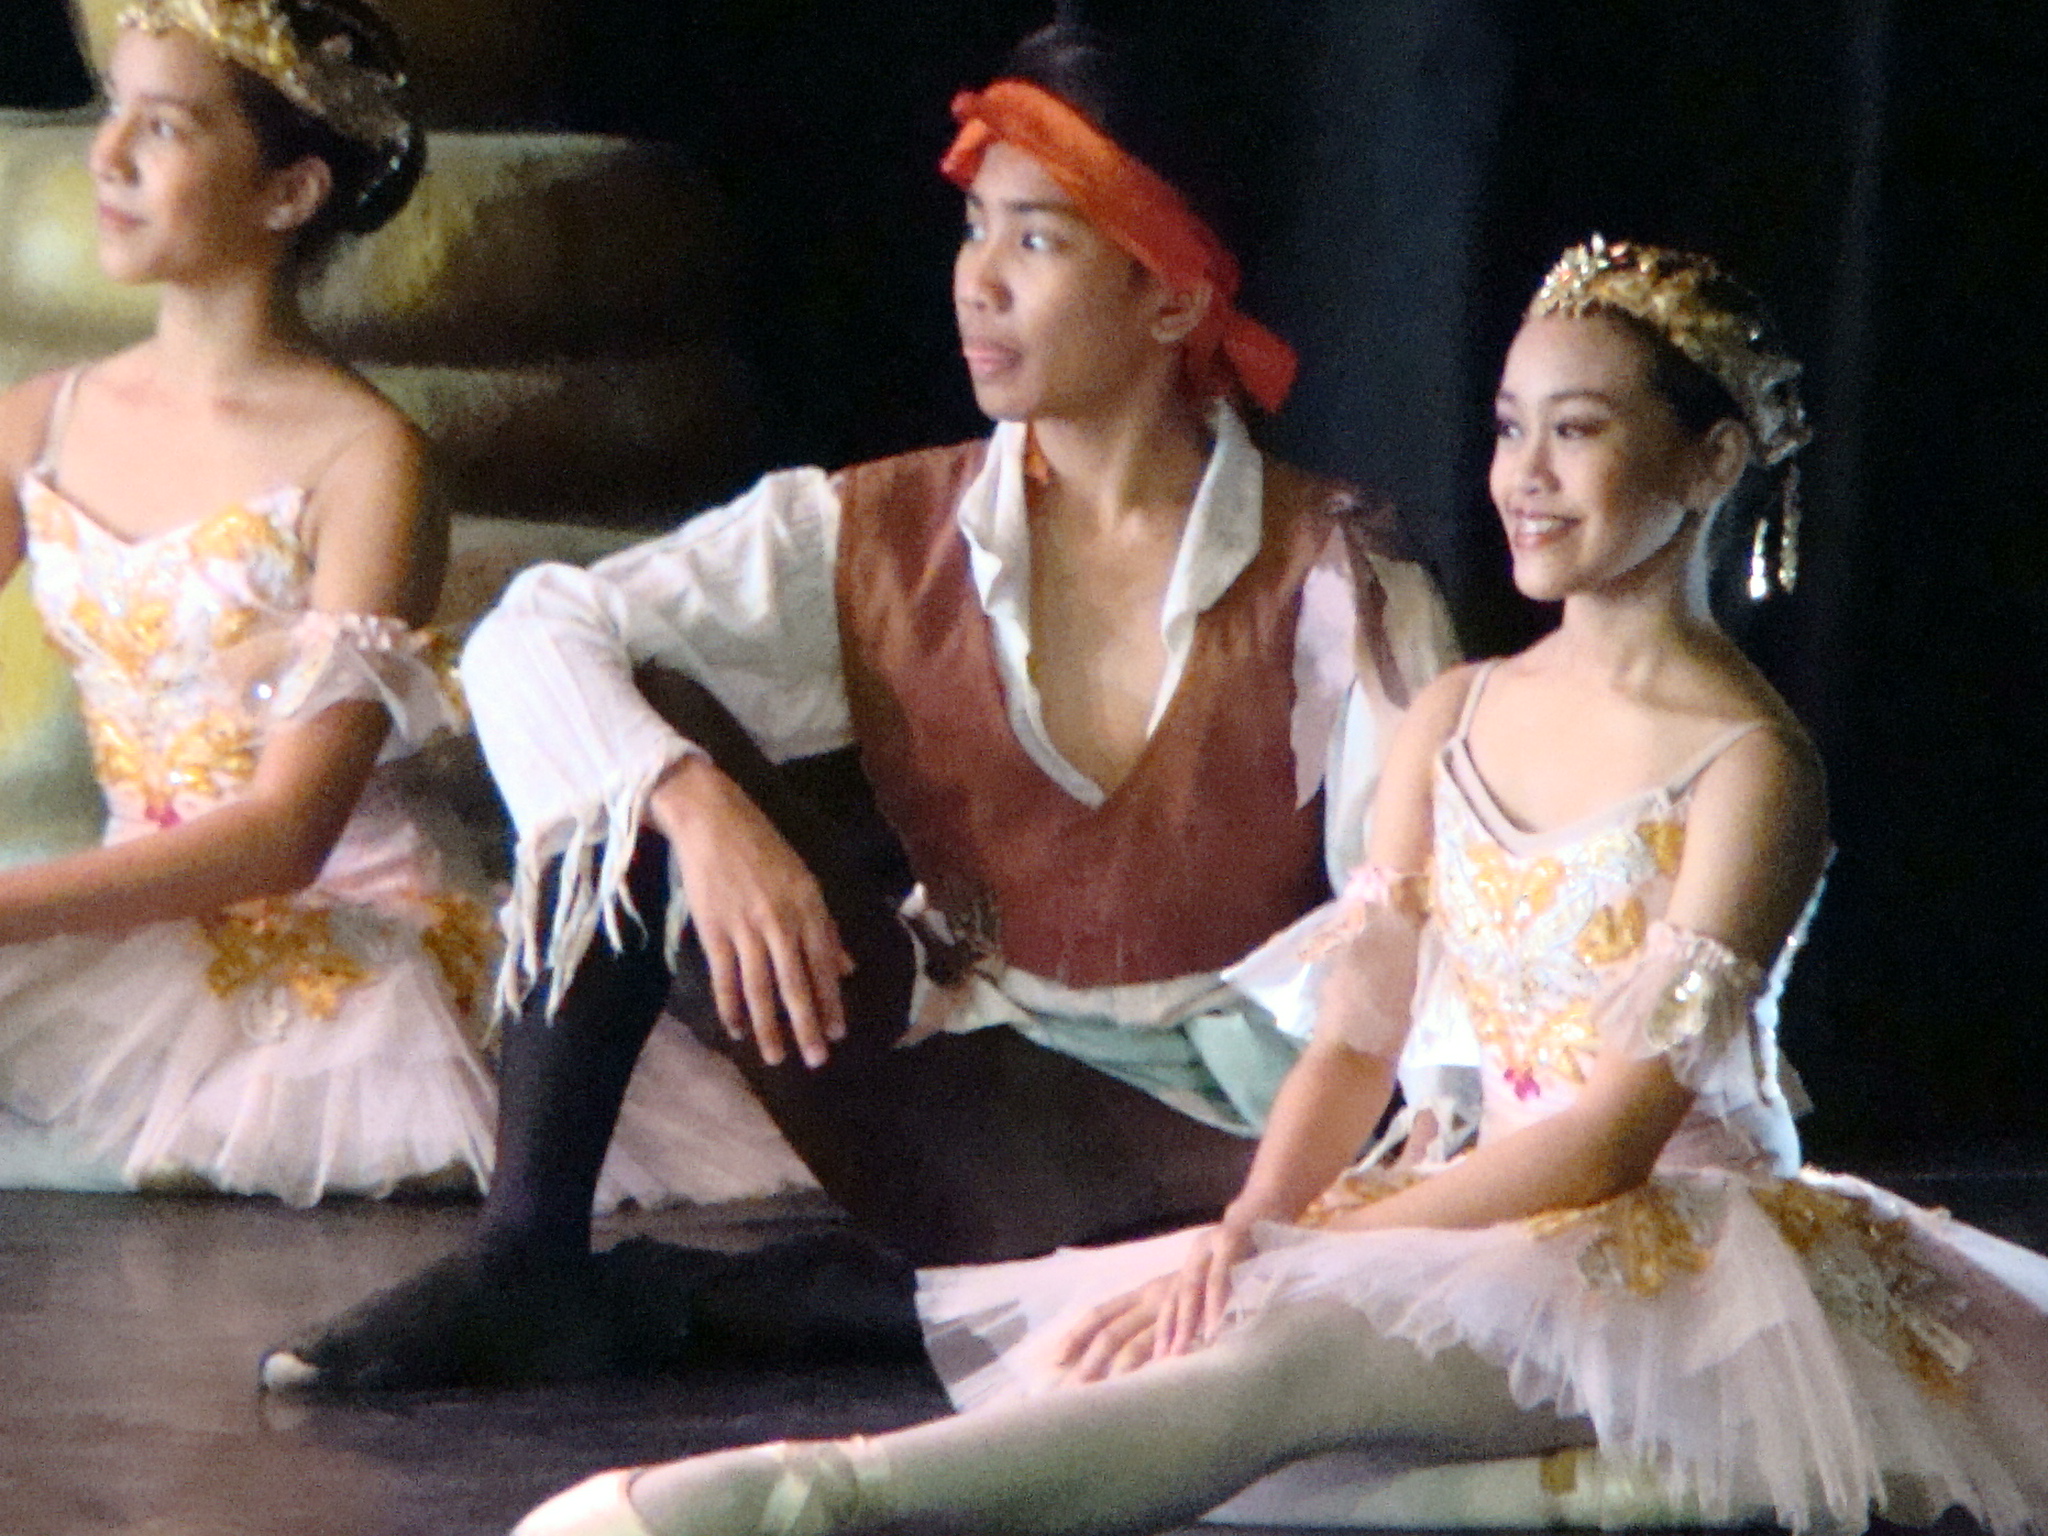 For Ballet Manila’s Must Dance workshop recital, Ashley (foreground) was in Le Corsaire.